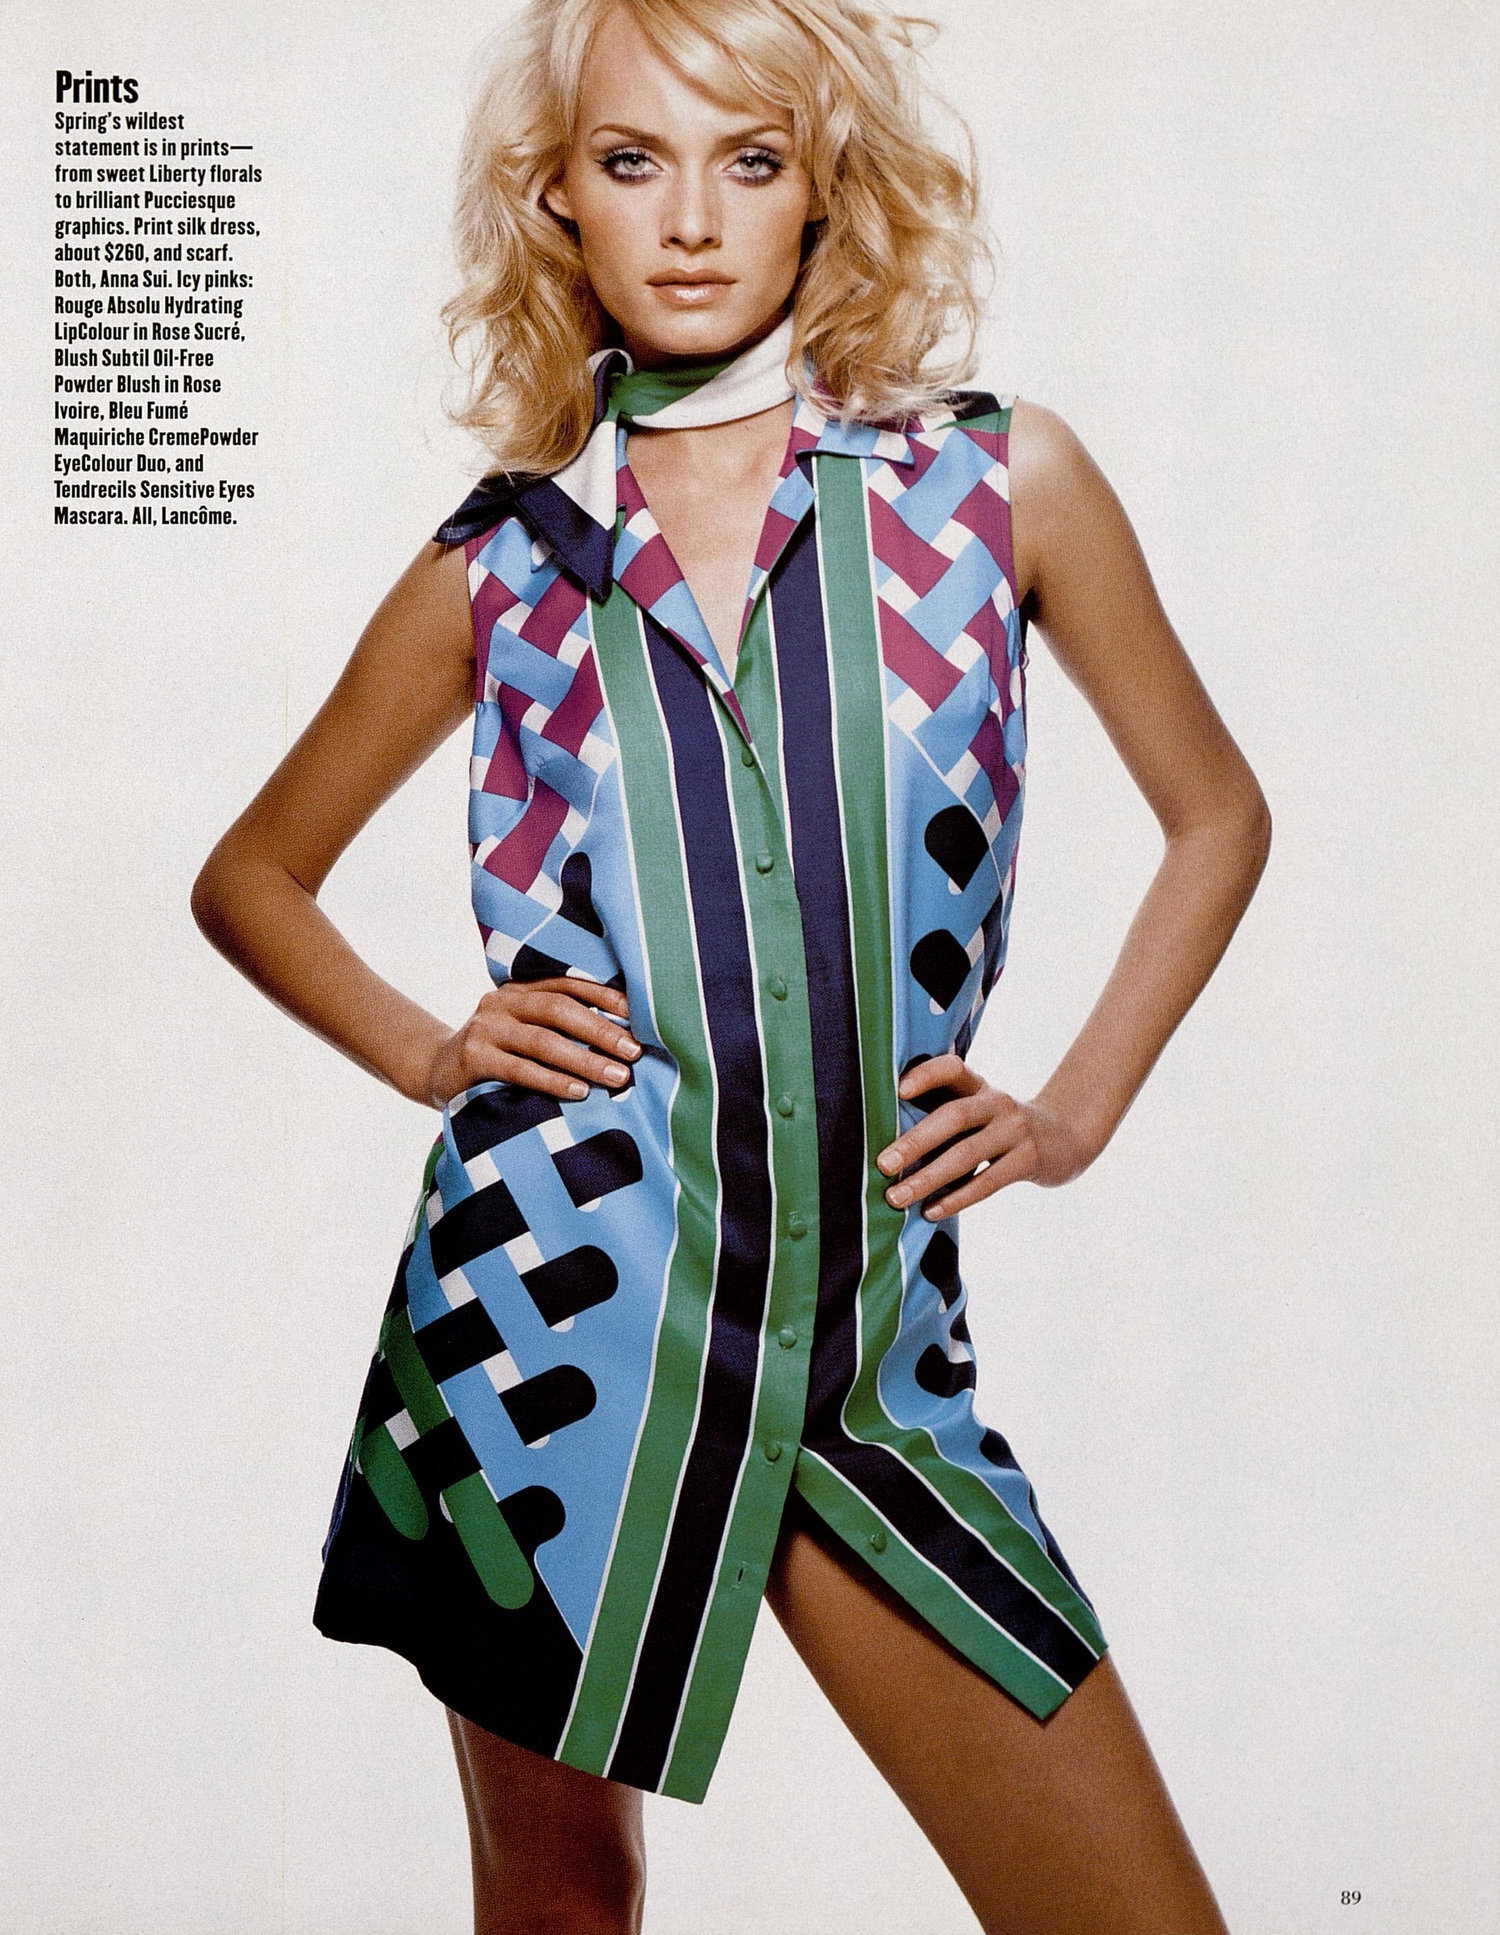 Amber Valetta in a graphic print dress. Photo by Patrick Demarchelier for Harper's Bazaar, January 1996.